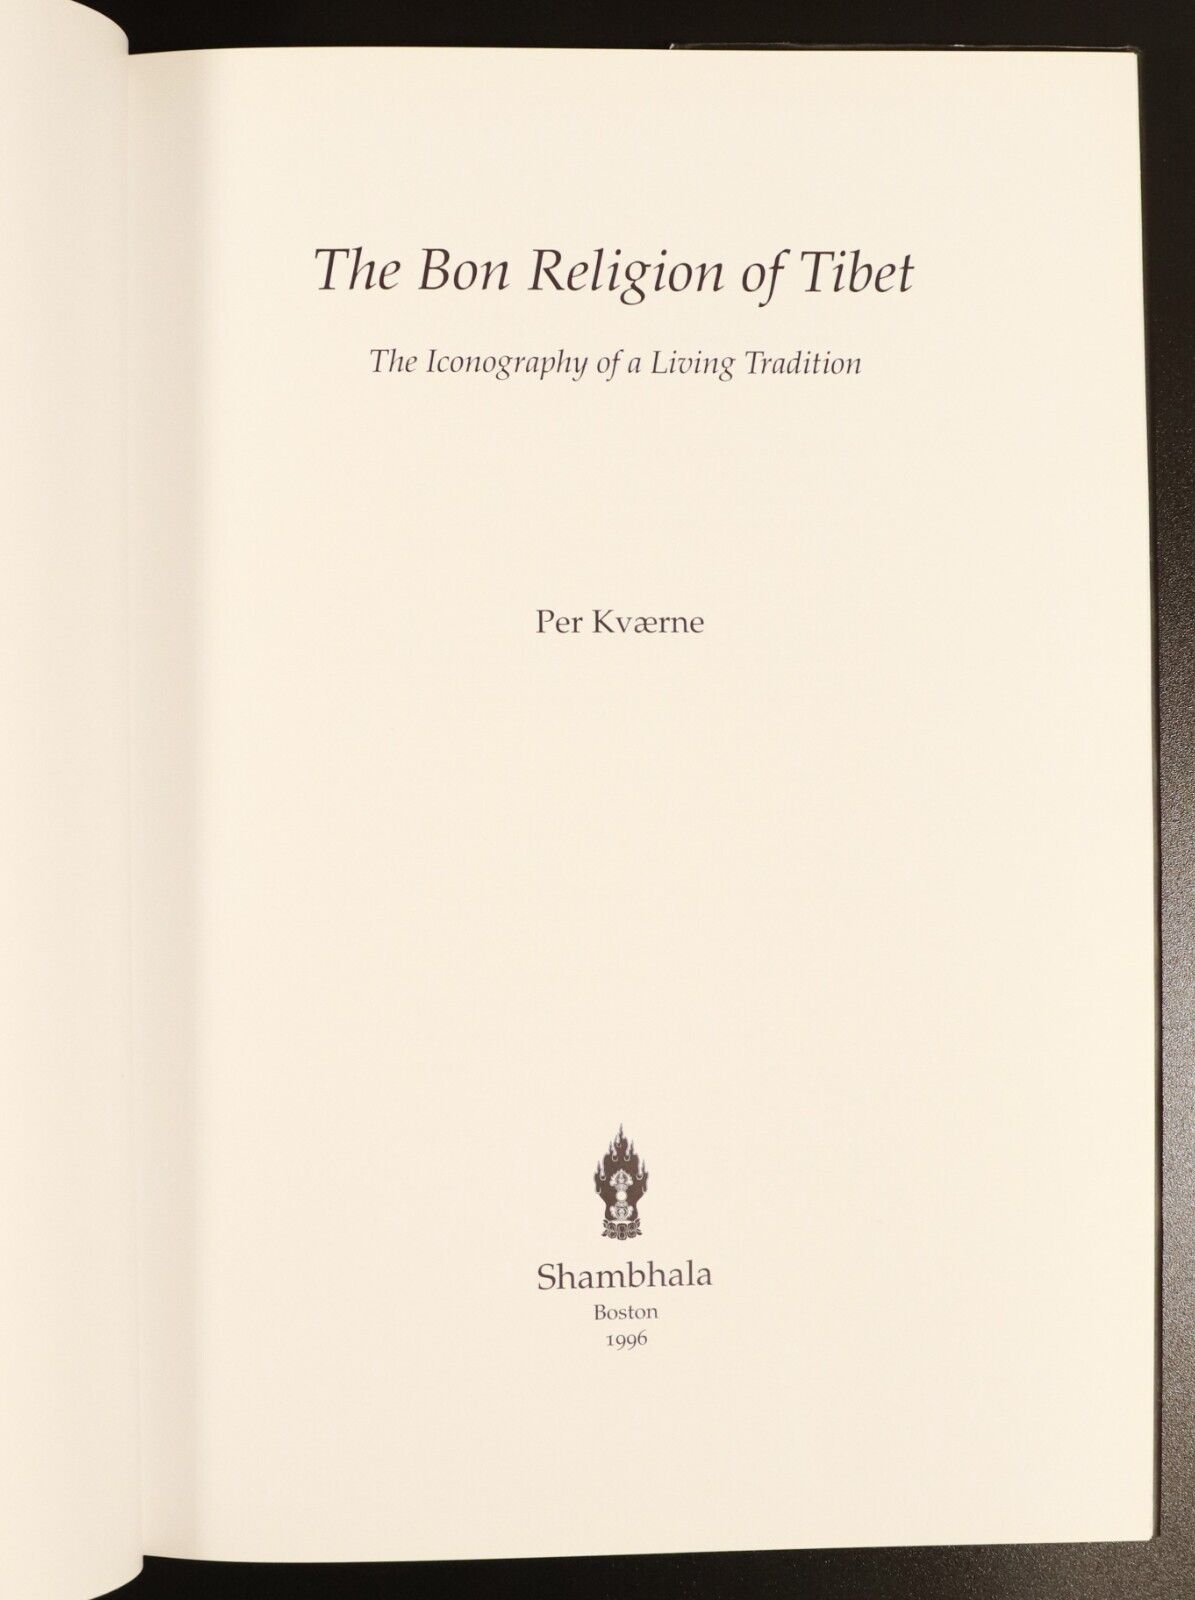 1996 The Bon Religion Of Tibet by Per Kvaerne Religious History Book China